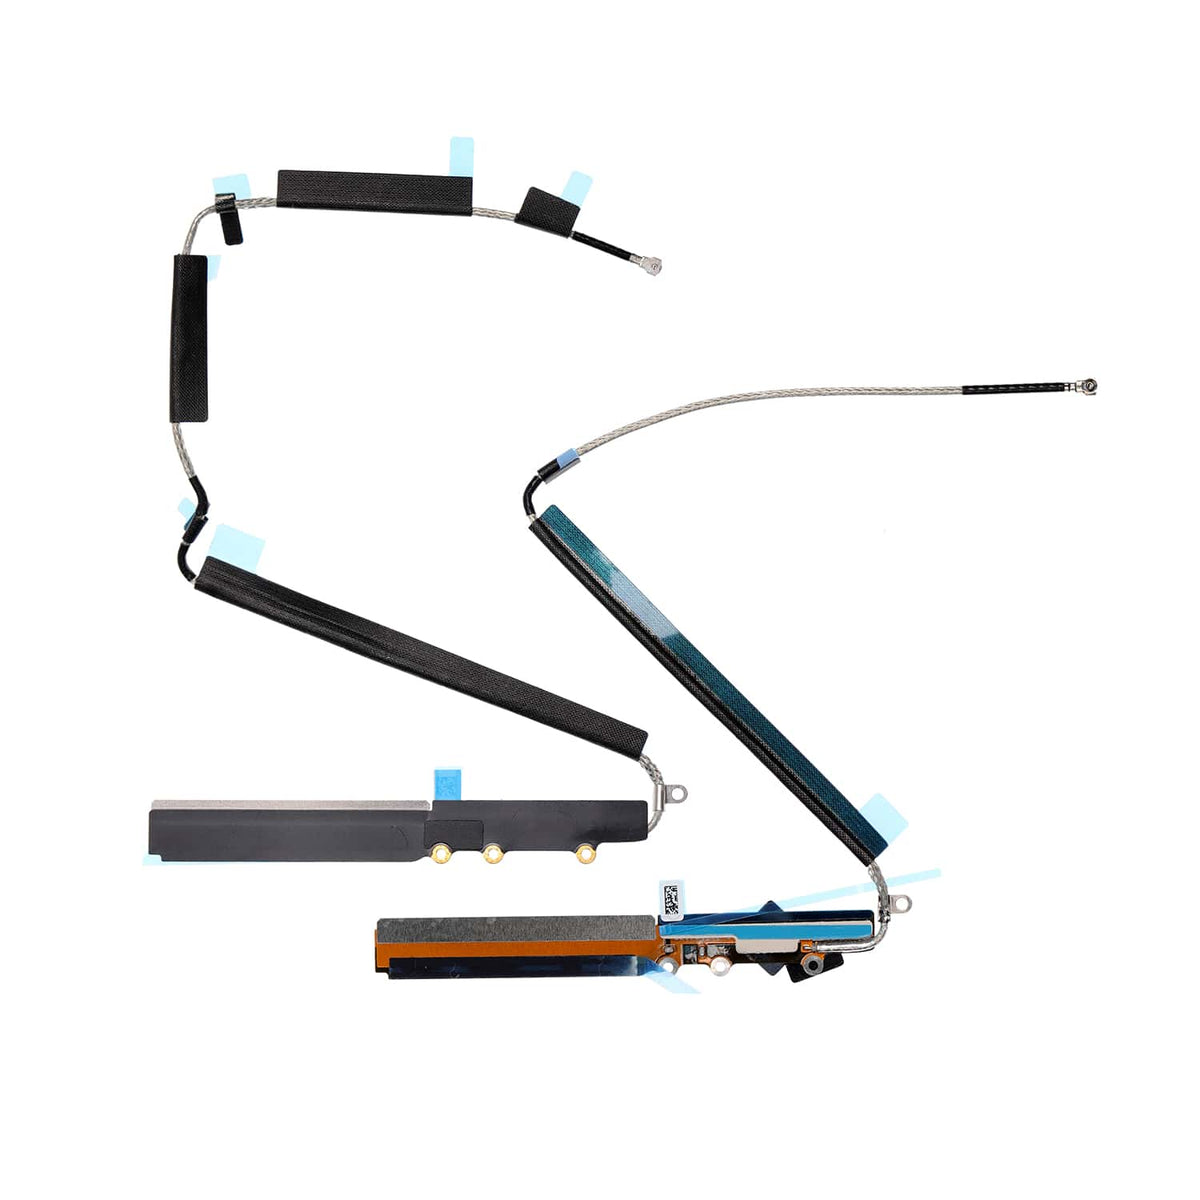 WIFI/BLUETOOTH FLEX CABLE FOR IPAD AIR 3/ PRO 10.5" 1ST GEN